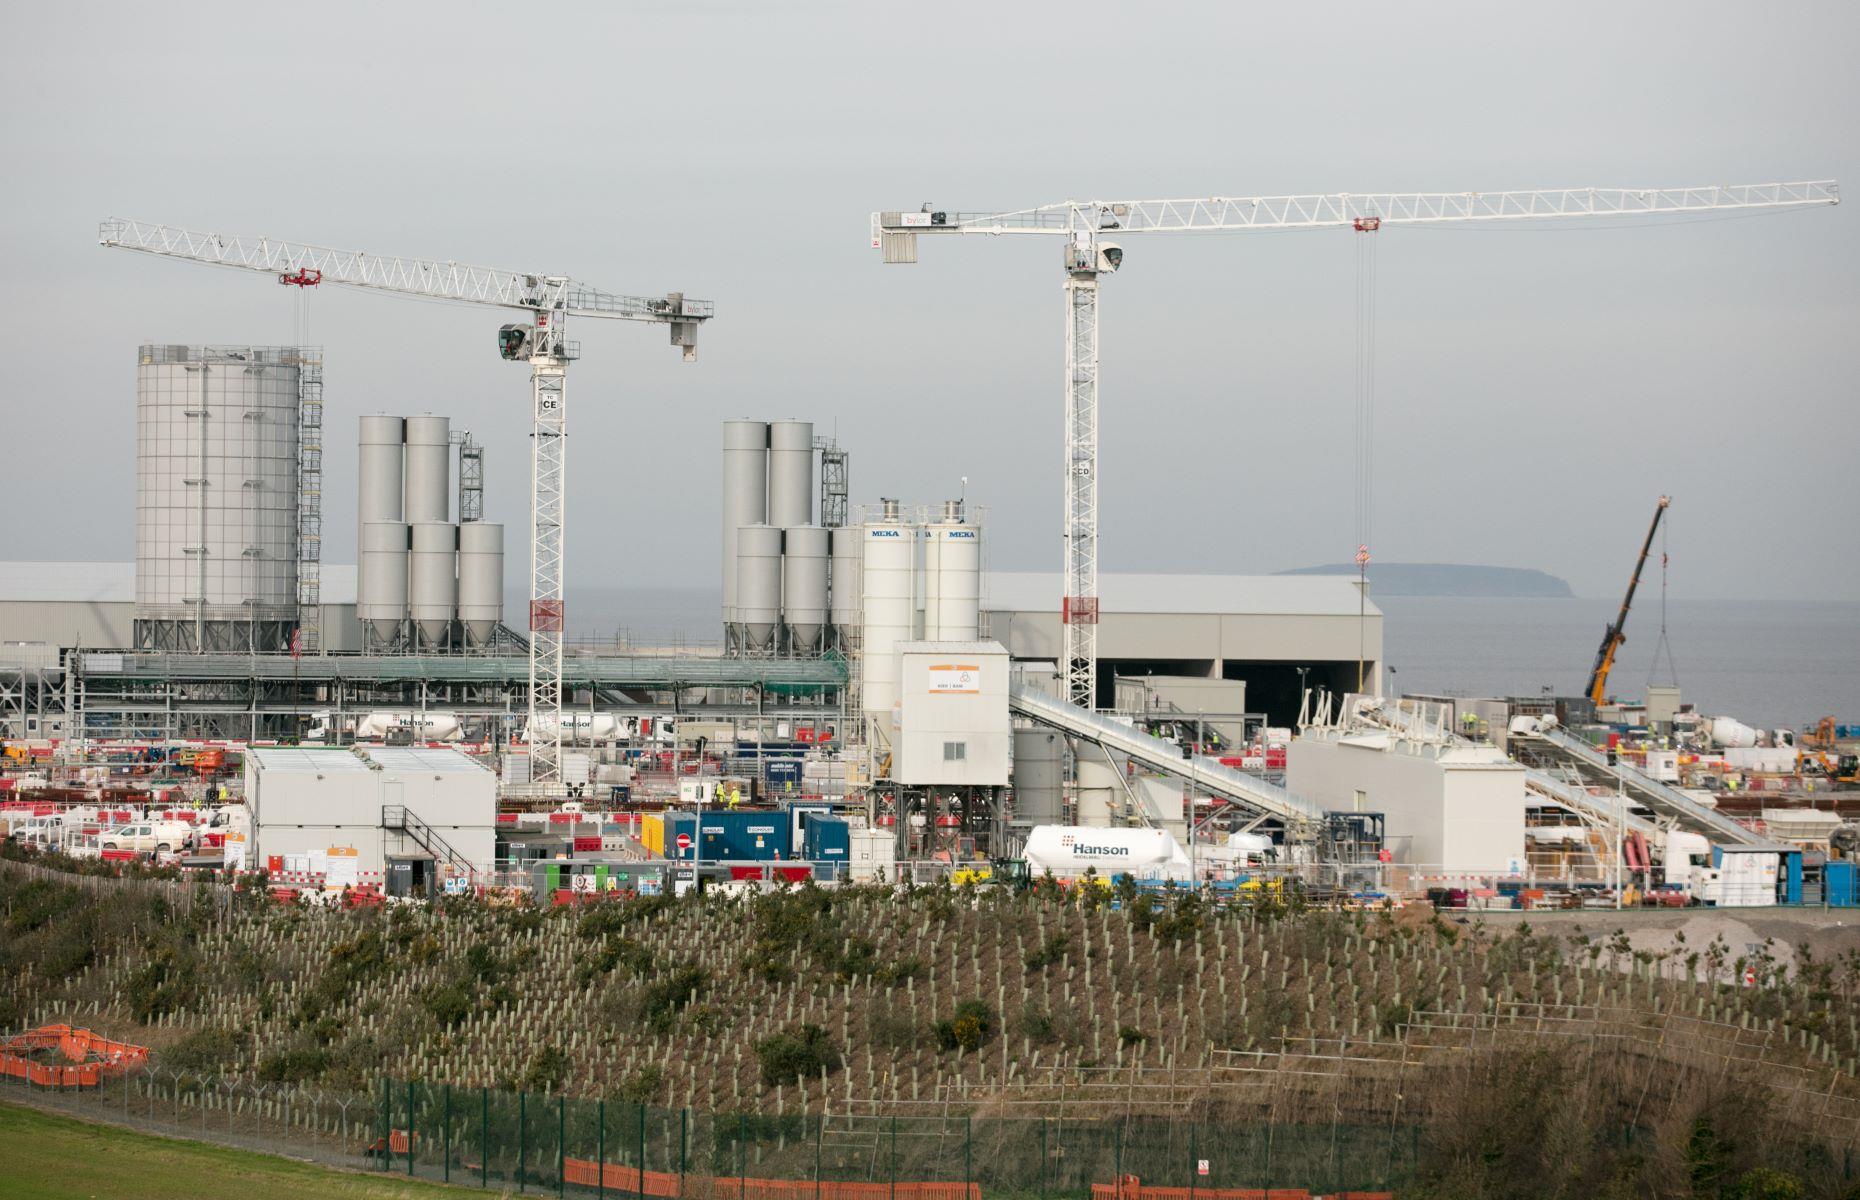 Hinkley Point C, UK: where are the workers?